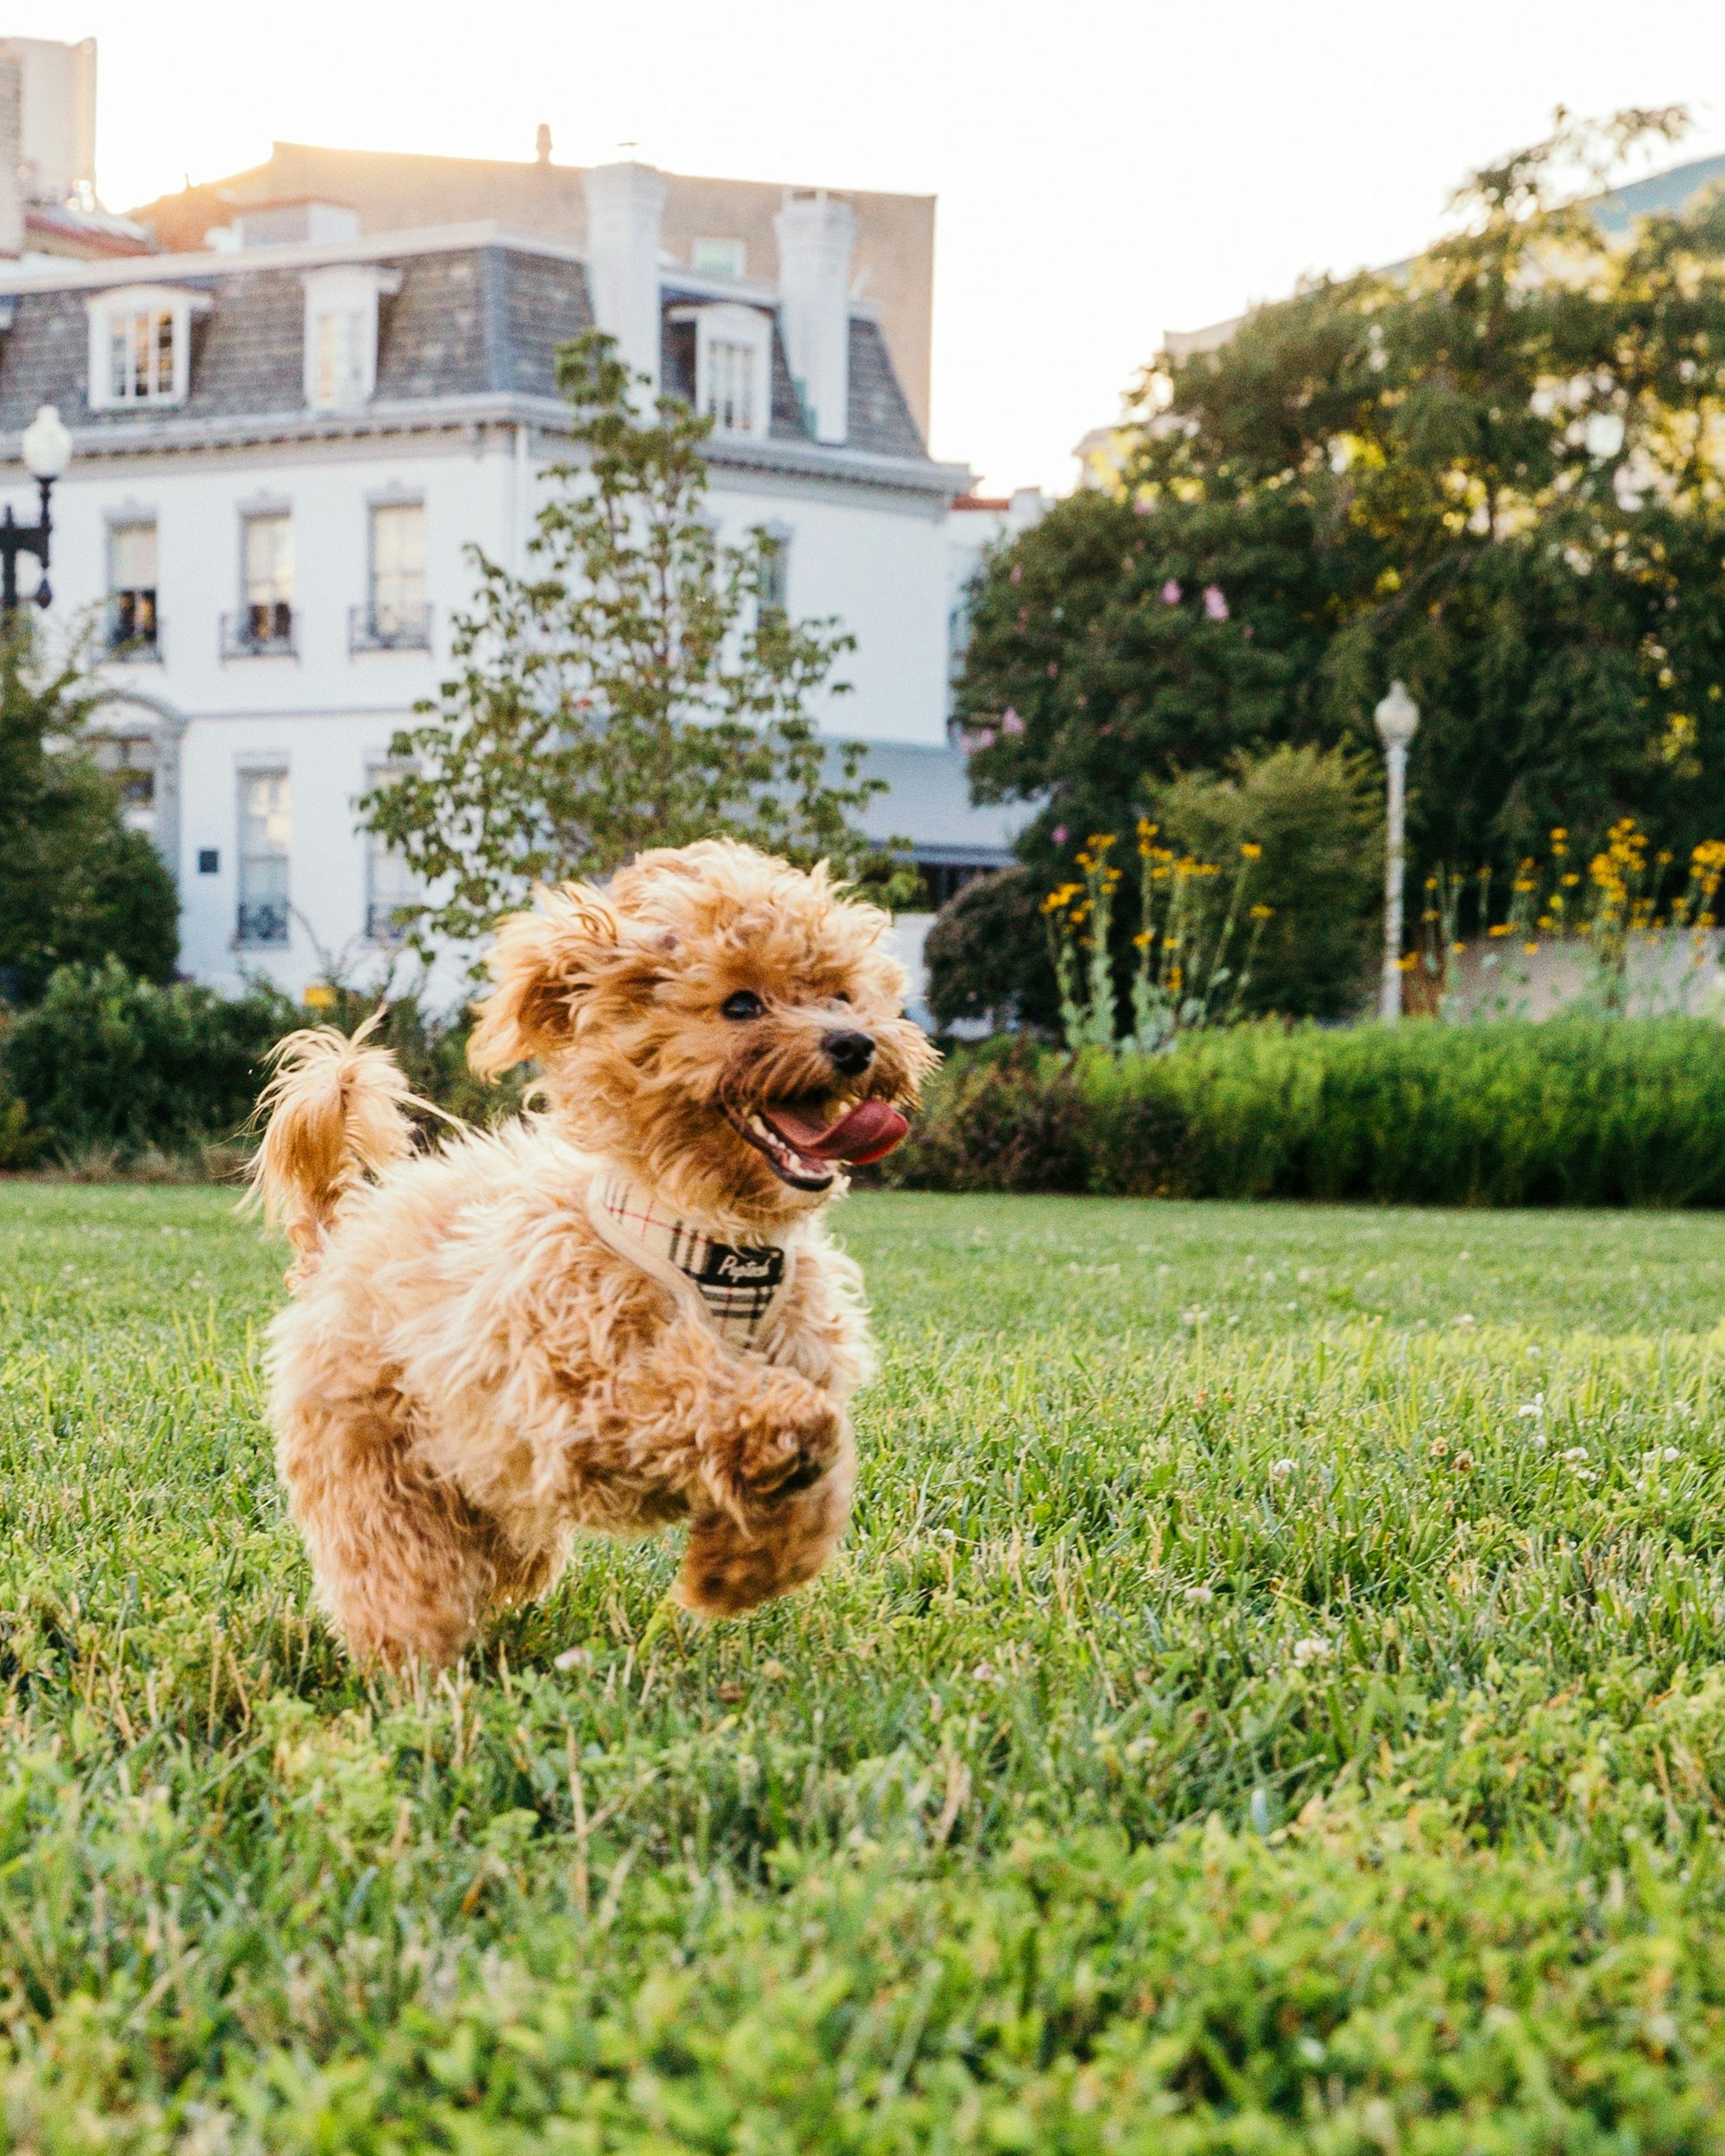 An excited puppy chases after a tennis ball in Washington, DC